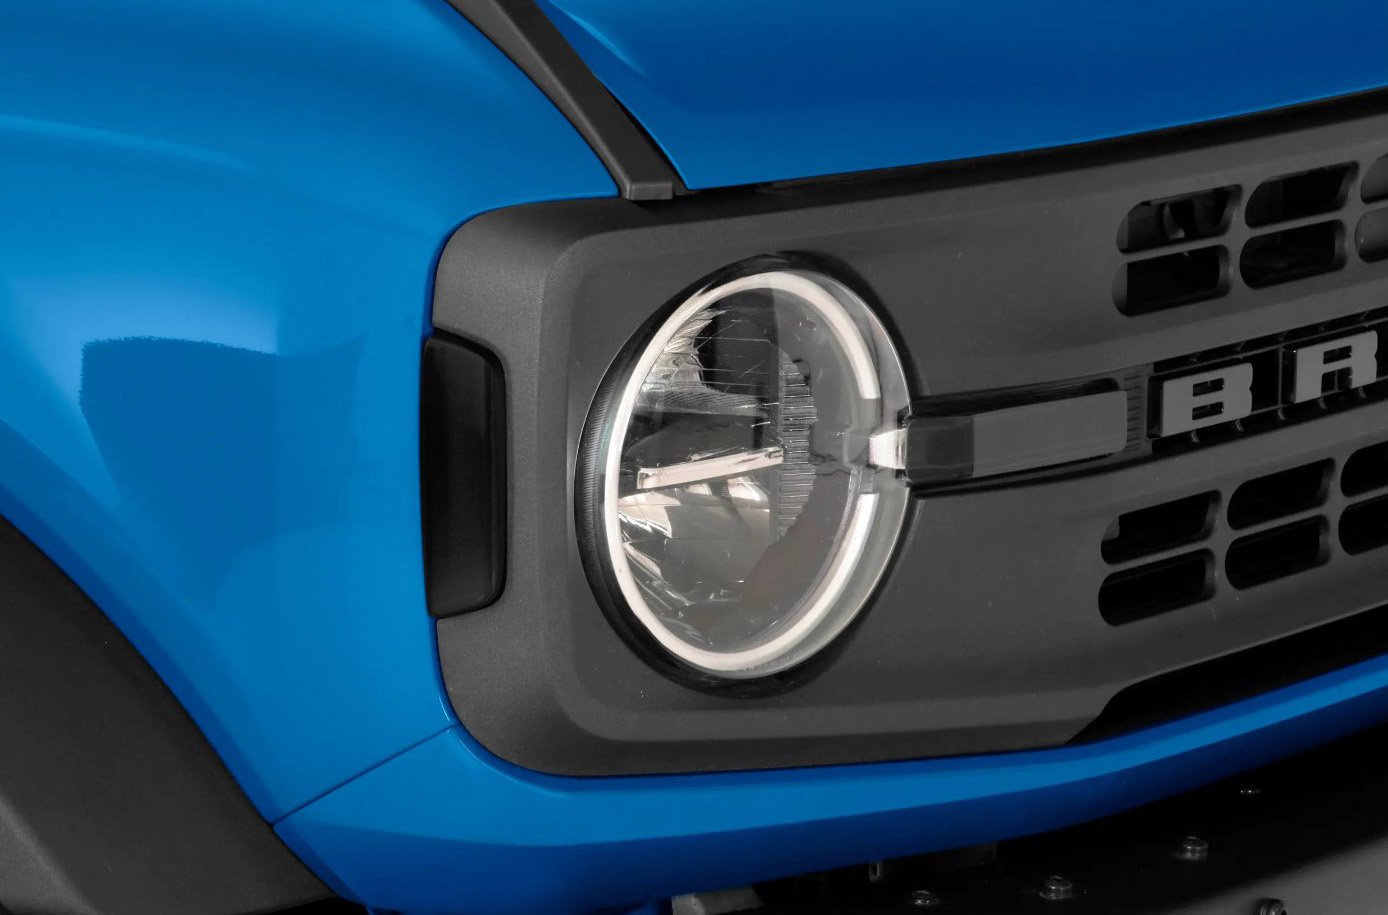 Smoked Daytime Running Light Cover Kit Fits Gen 6 Ford Bronco [non-LED]